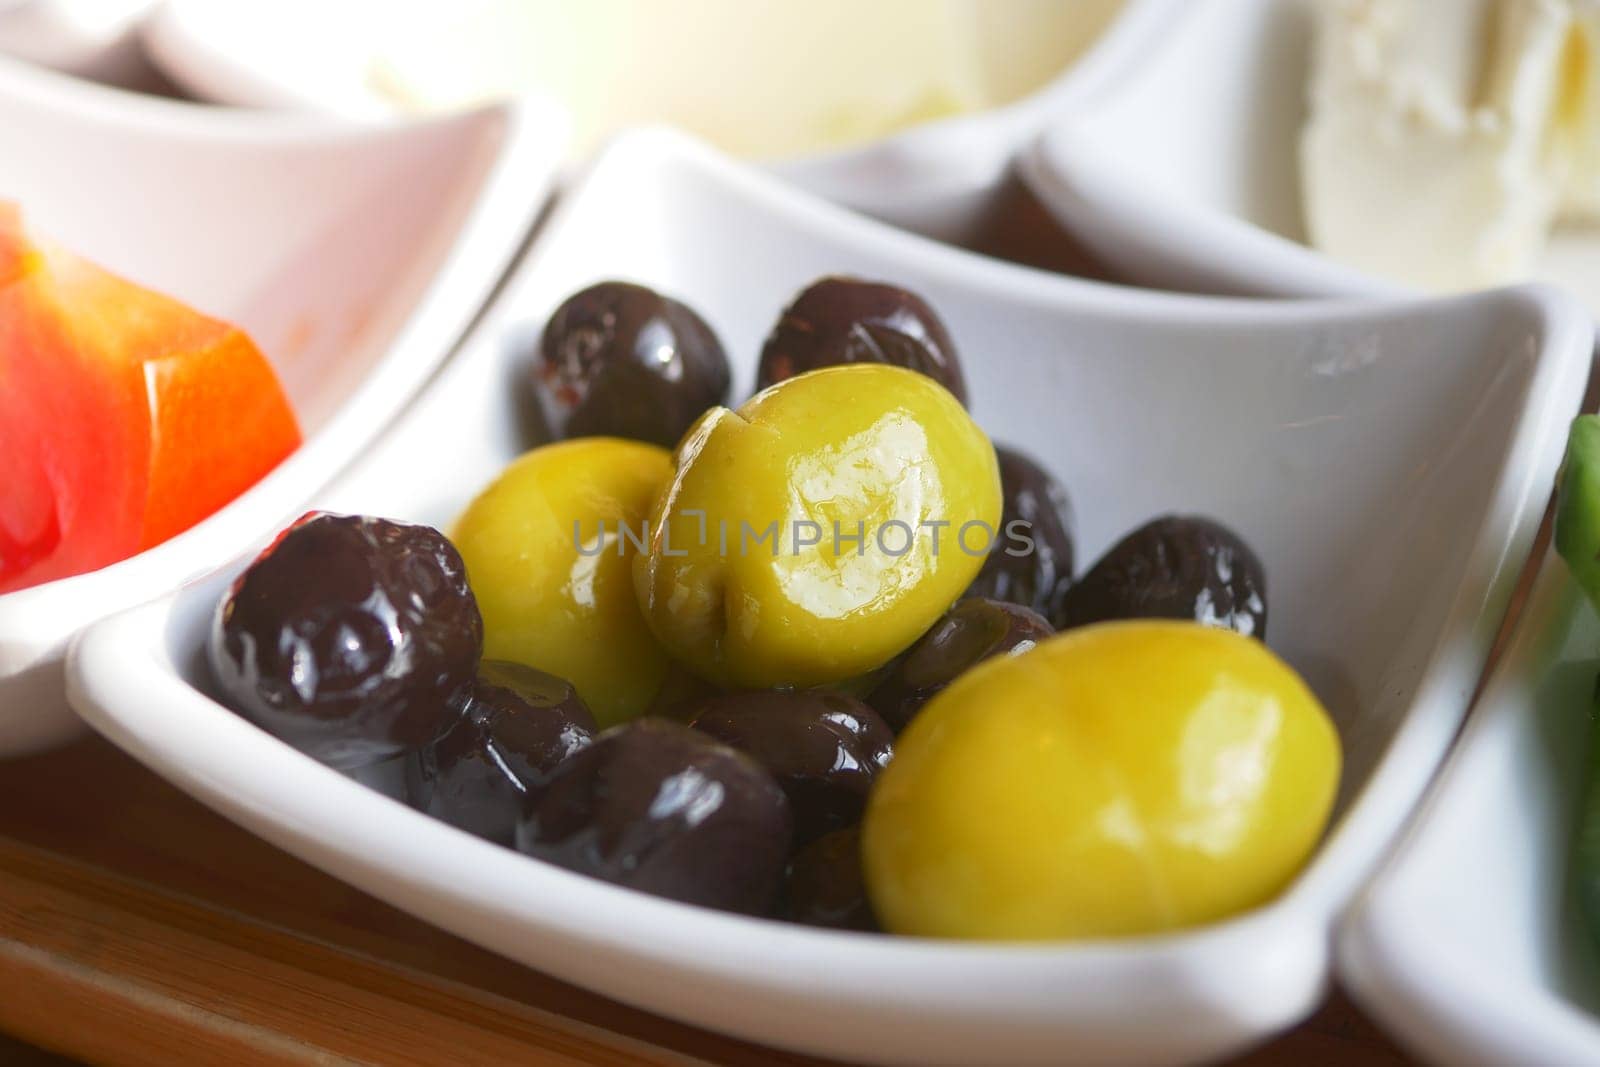 Collection of black and green olives with leaves